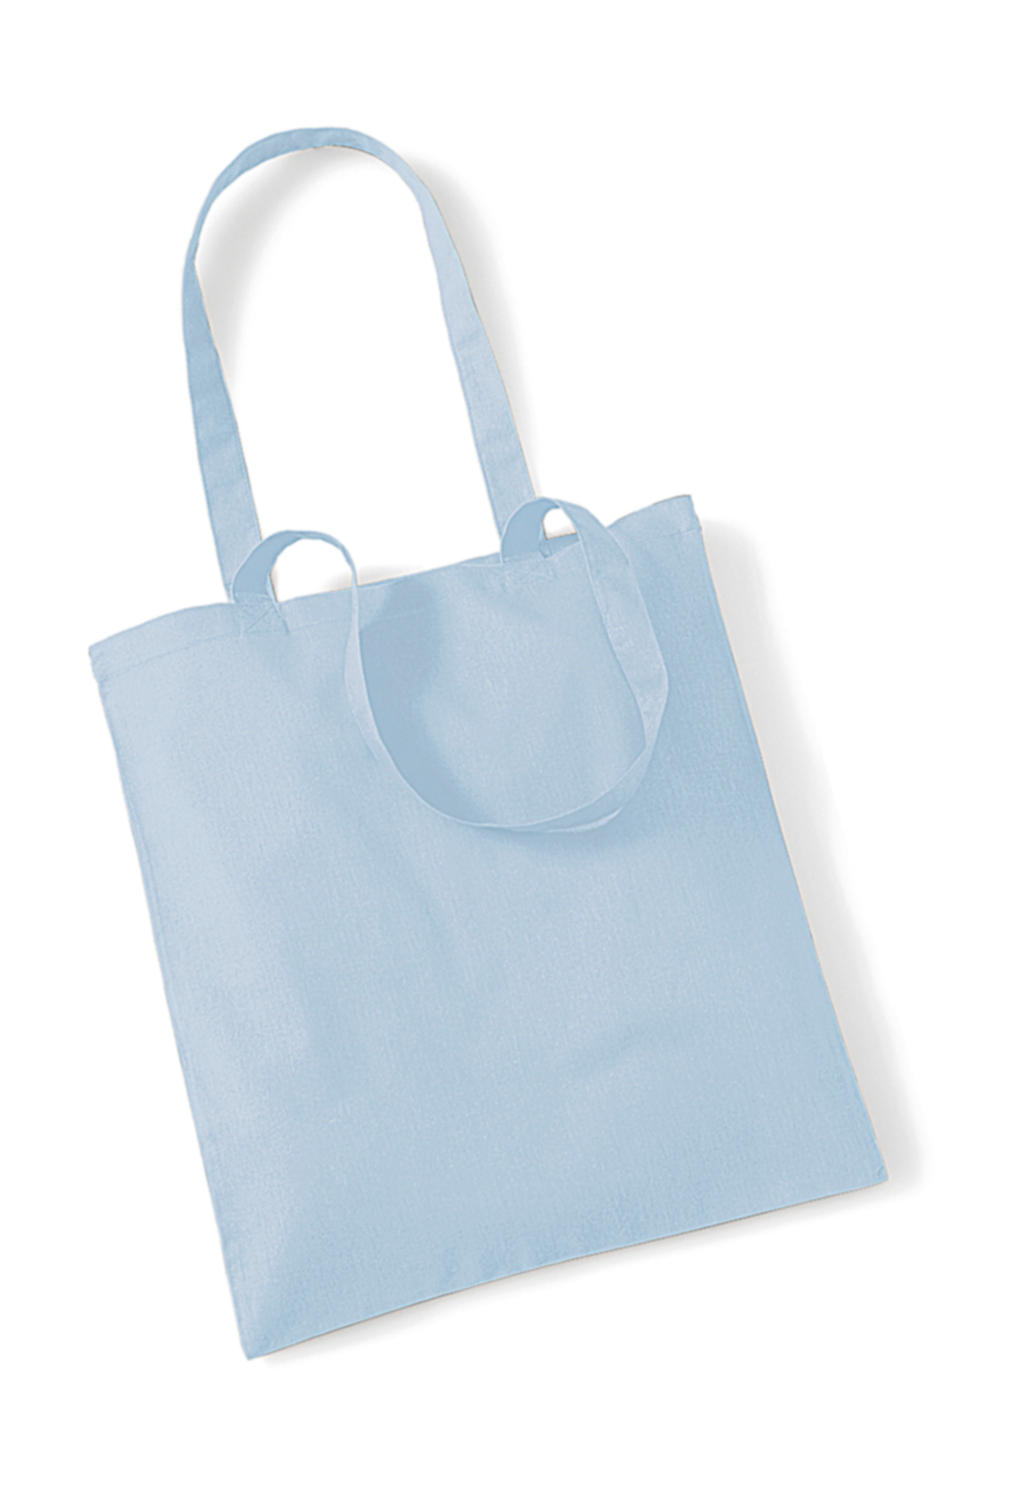  Bag for Life - Long Handles in Farbe Pastel Blue